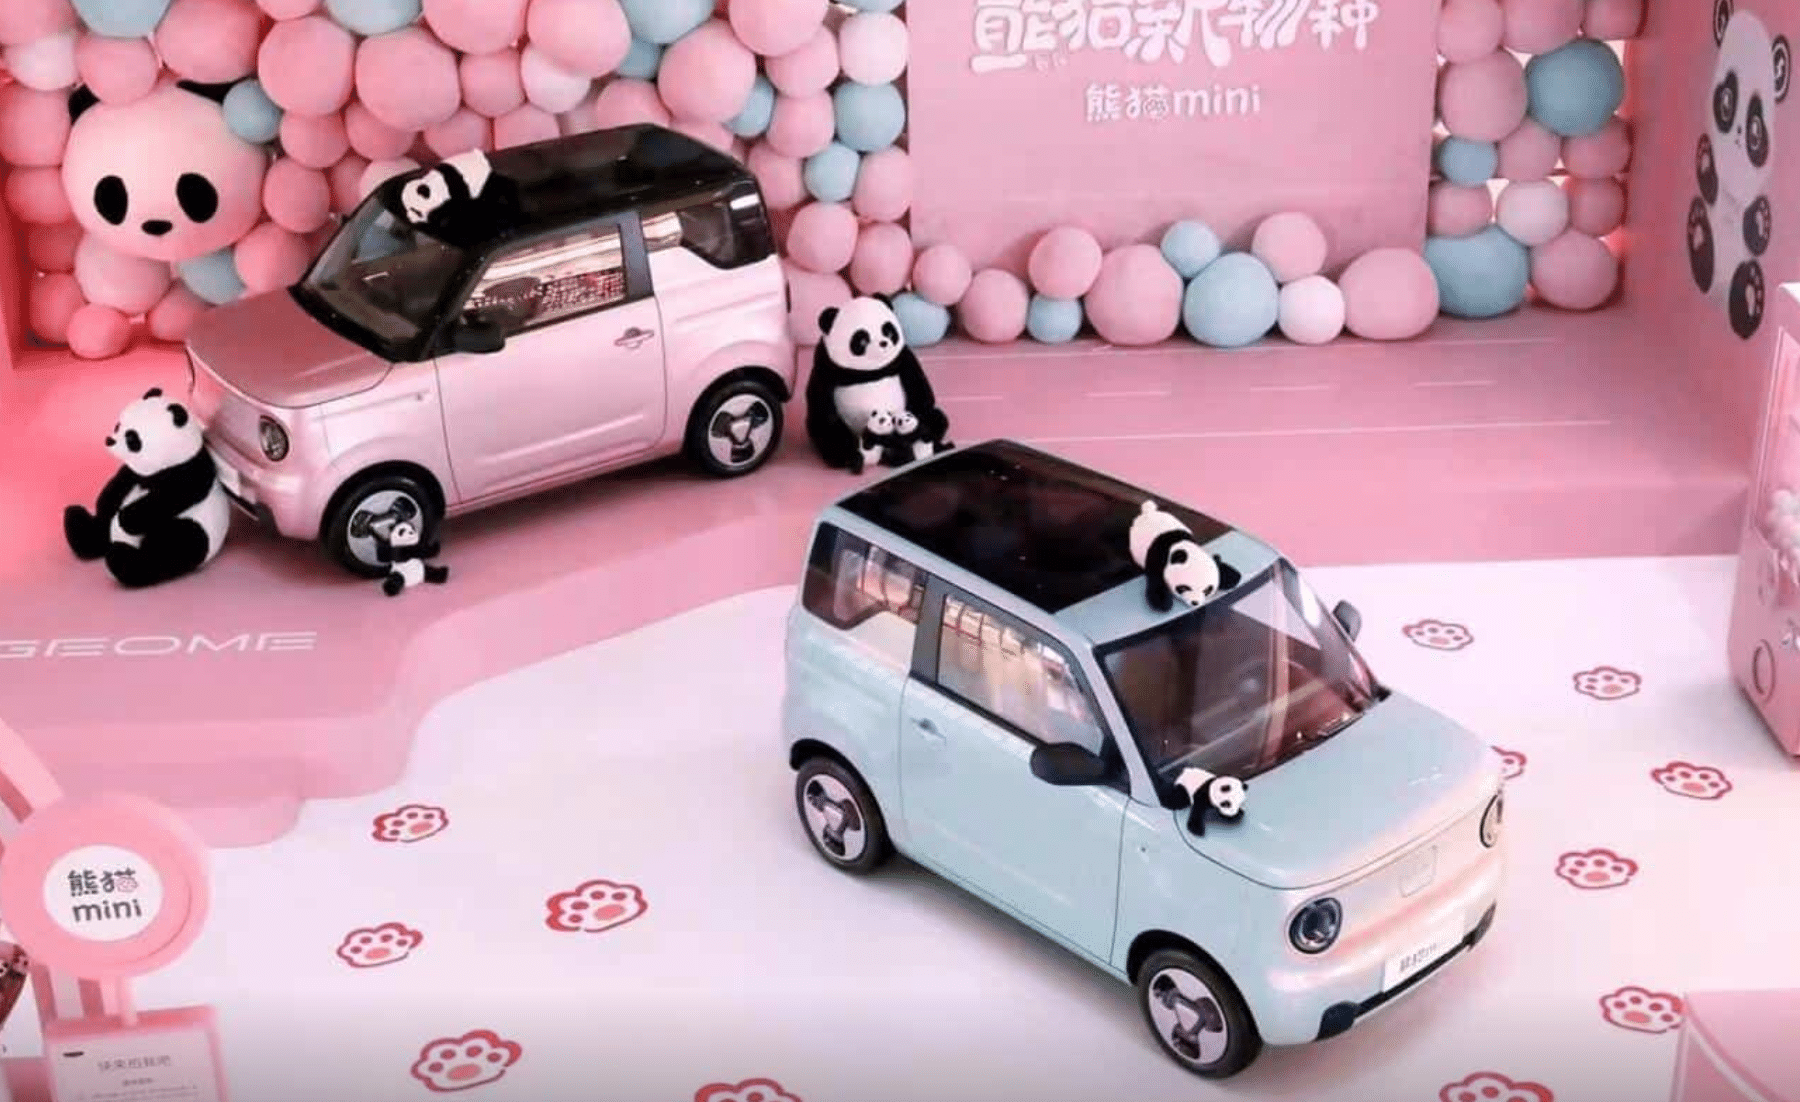 Geely Panda Mini EV cuts prices by 1,400 USD